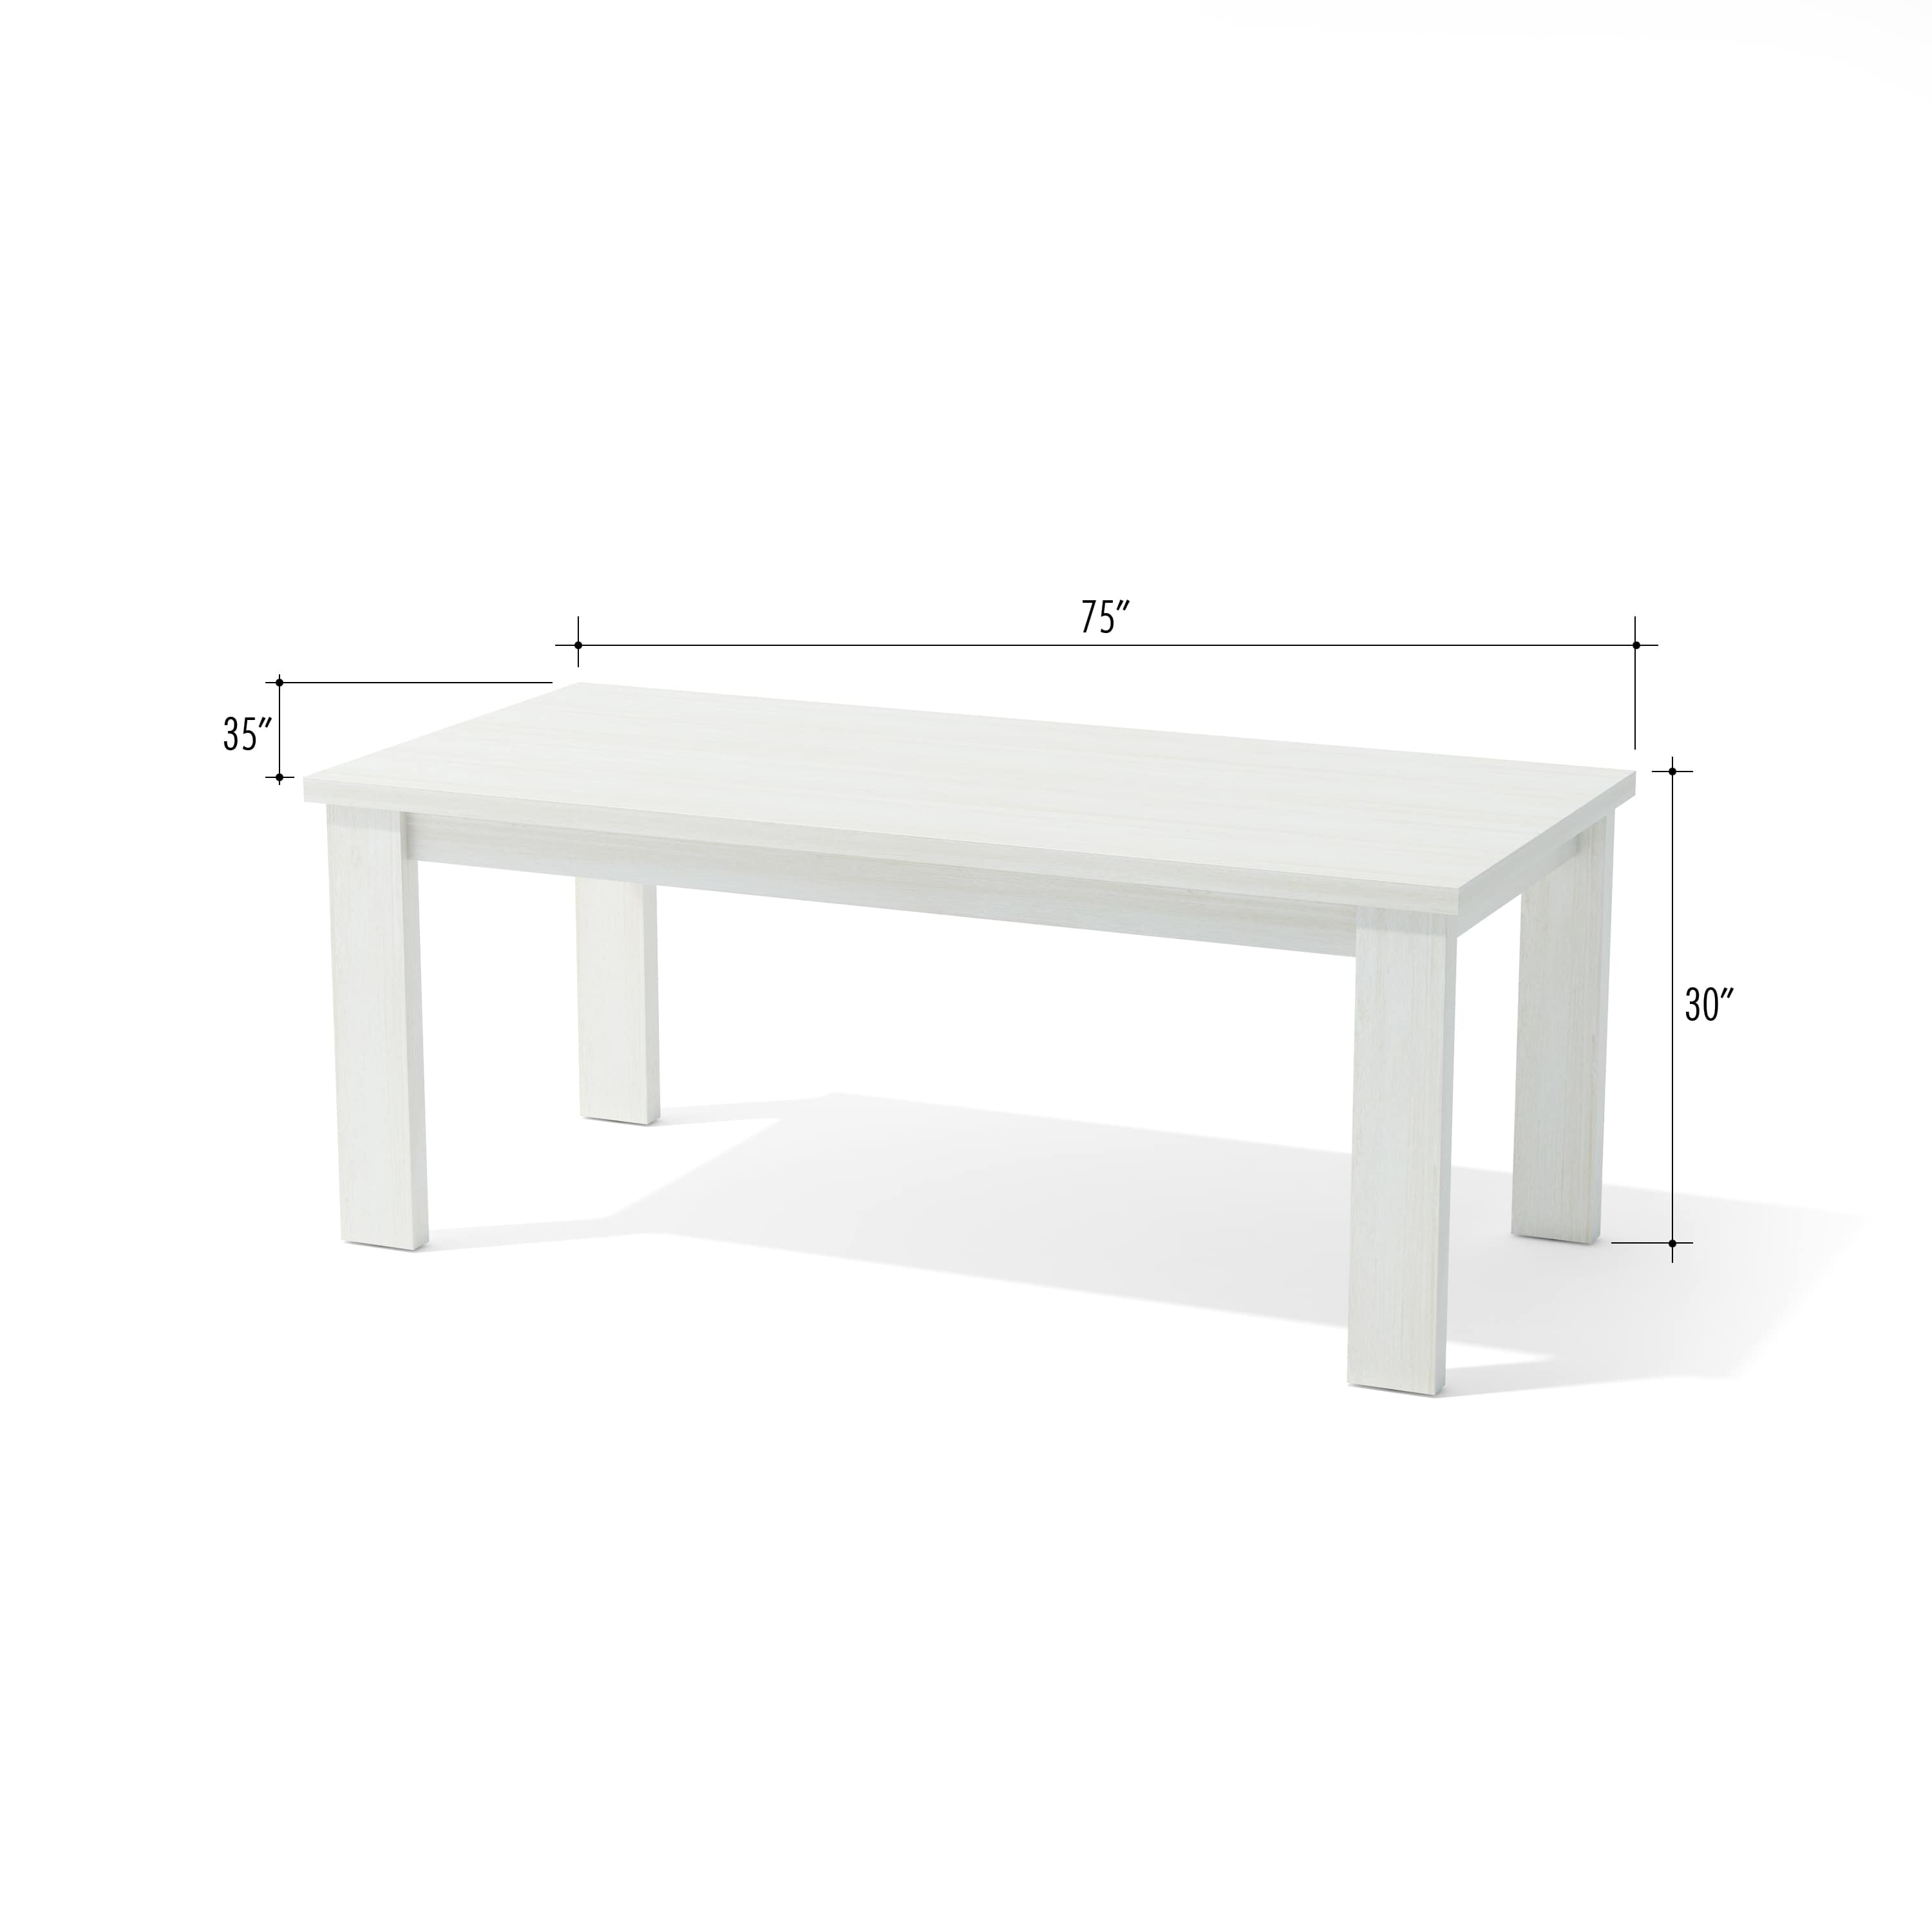 Anderson teak white dining table